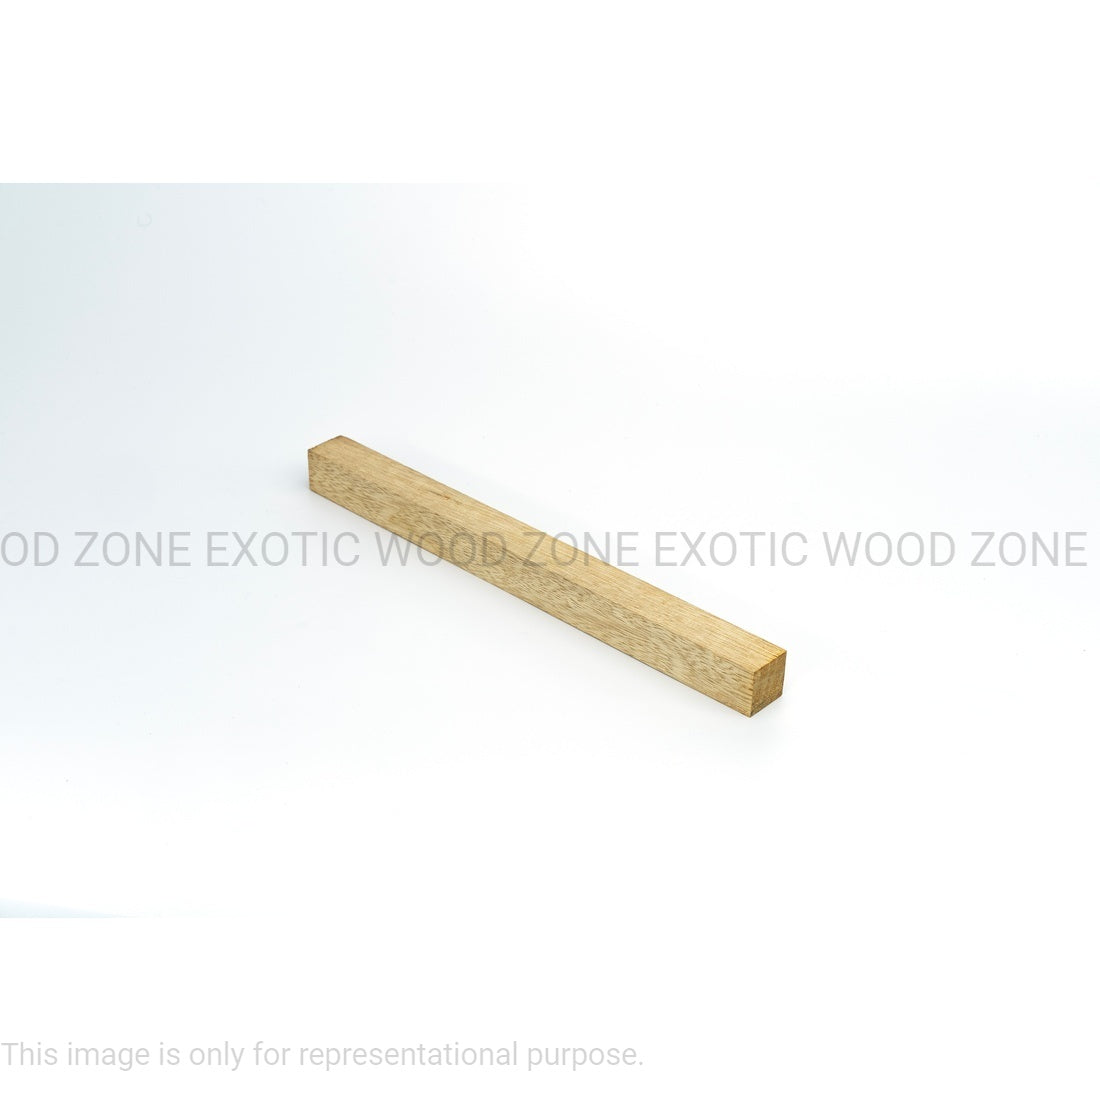 White Limba Hobbywood Blank 1&quot; x 1 &quot; x 12&quot; inches Exotic Wood Zone